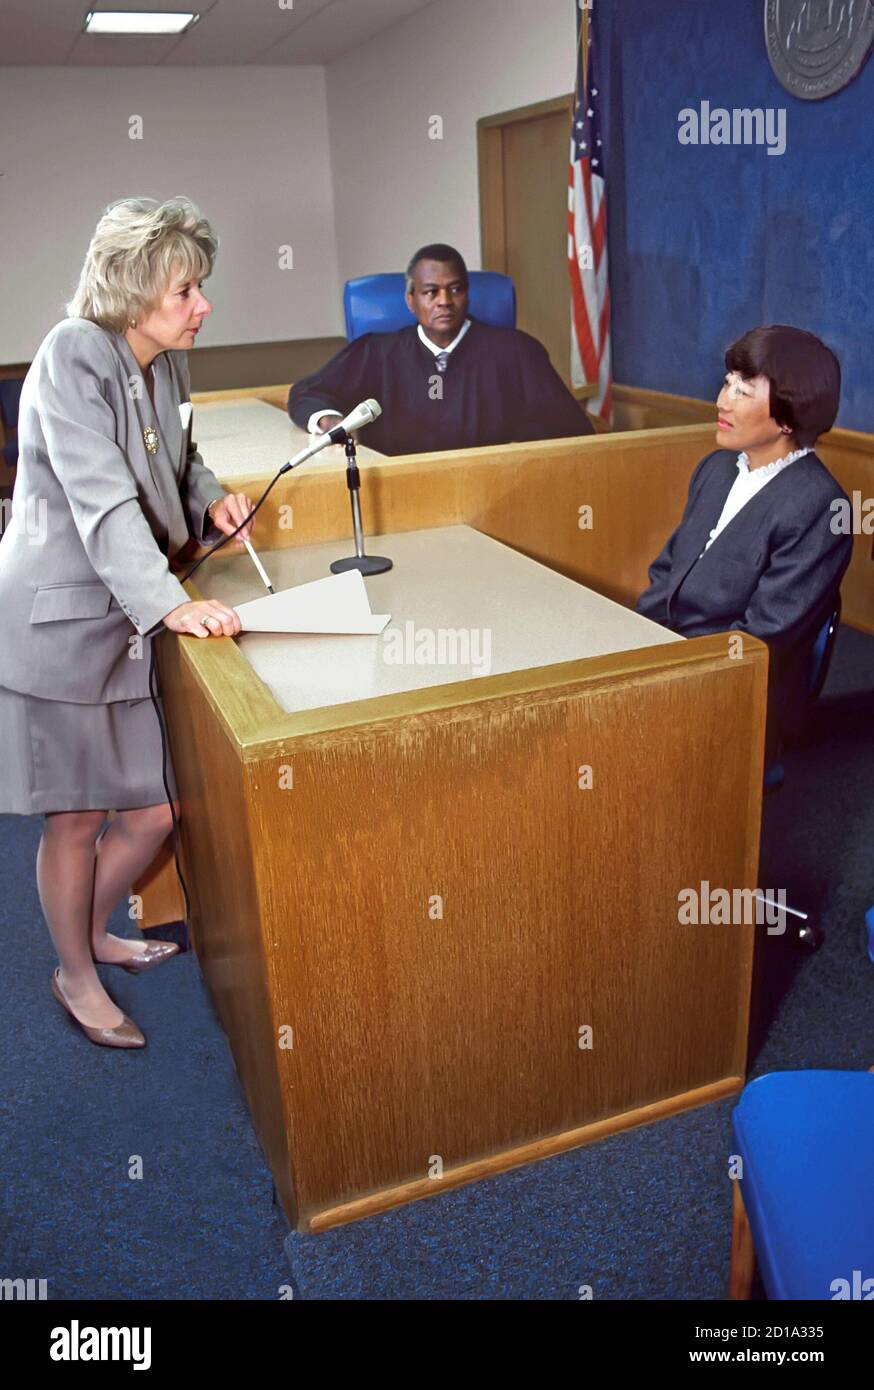 Female lawyer prosecutor questions Asian witness with black judge looking on Stock Photo